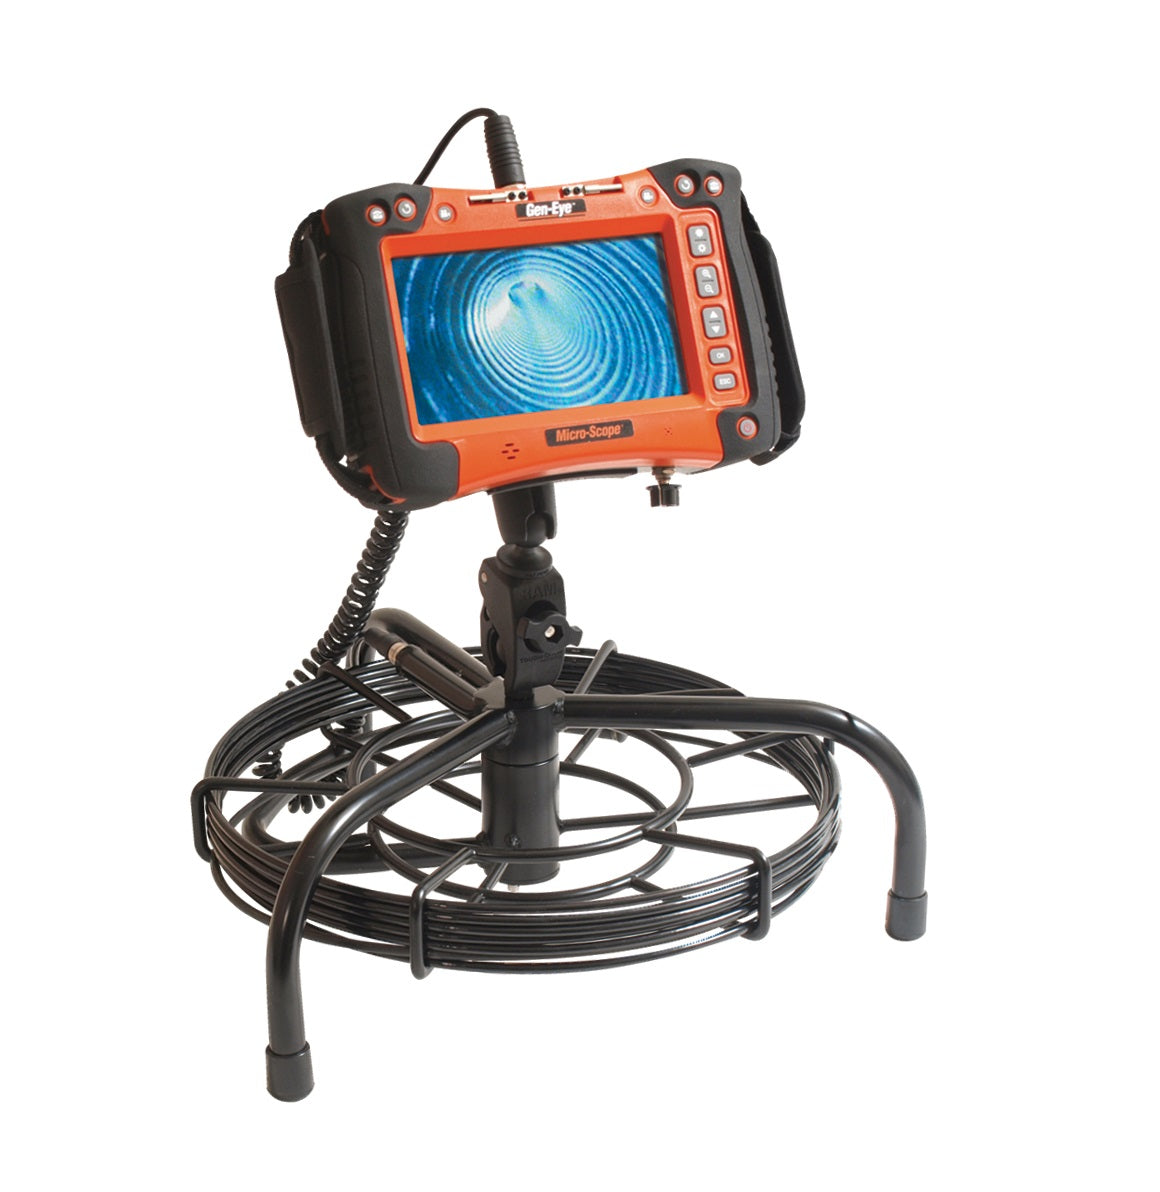 General Pipe Cleaners Gen-Eye Micro-Scope3 Compact Handheld Pipe Inspection/Location System